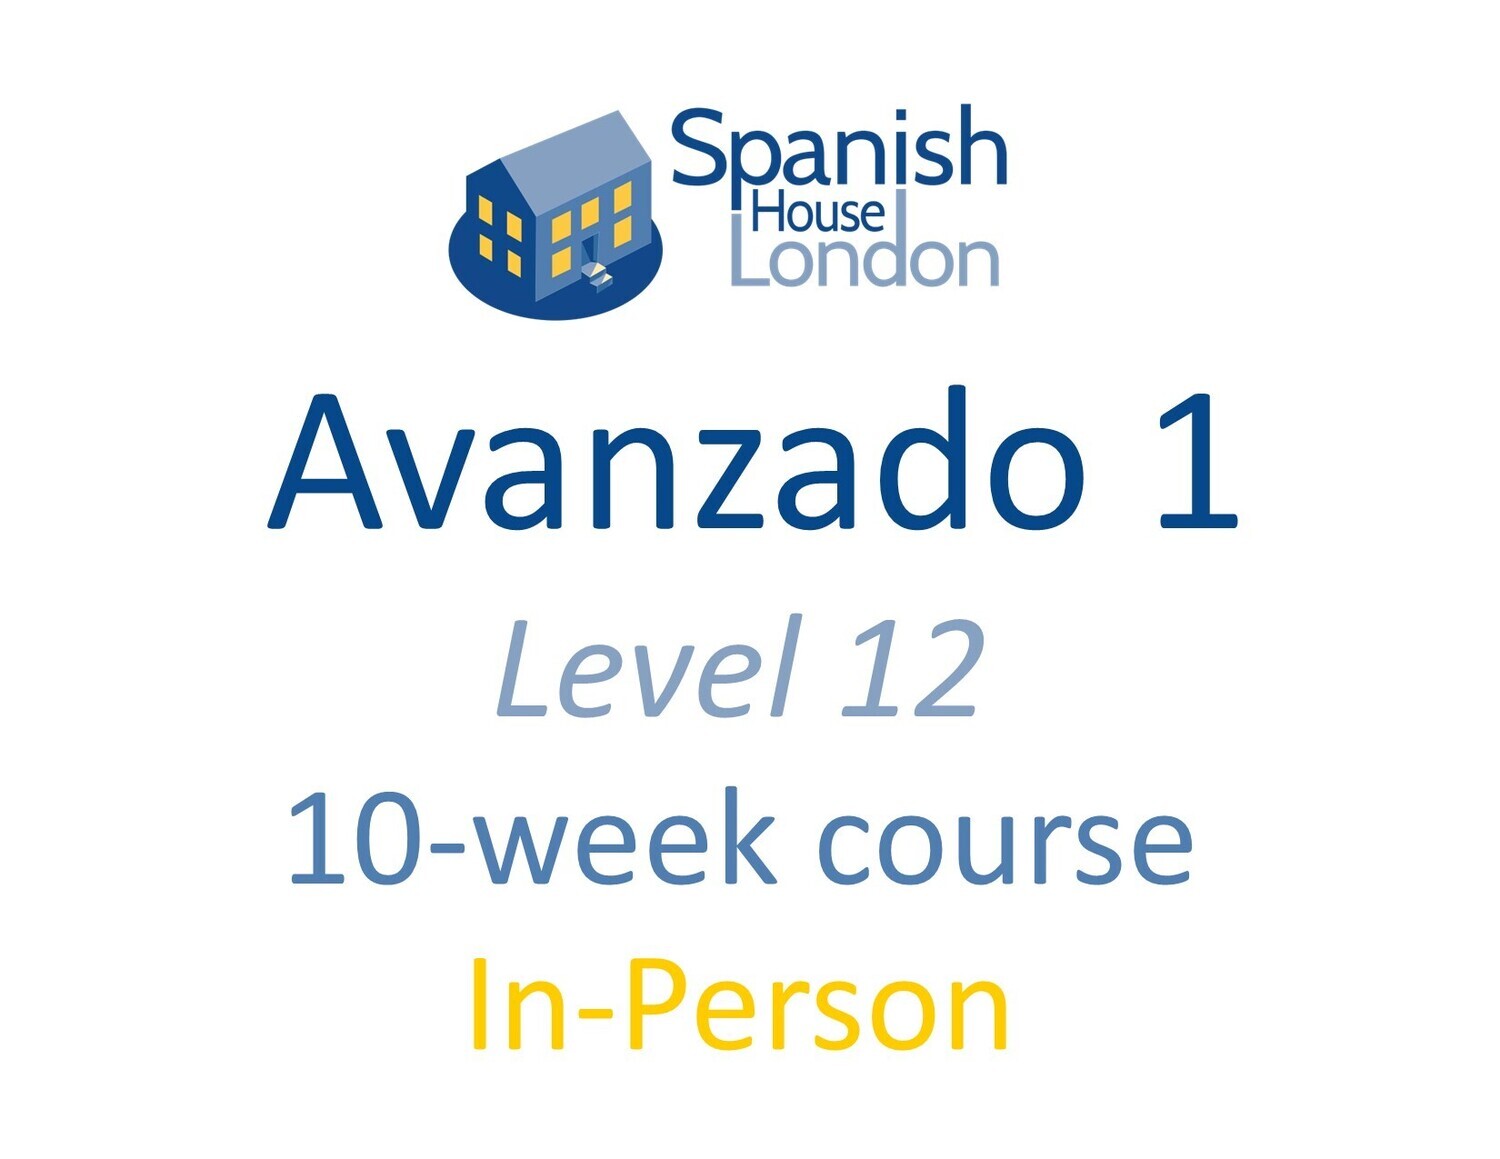 Avanzado 1 Course starting on 13th May at 6pm in Clapham